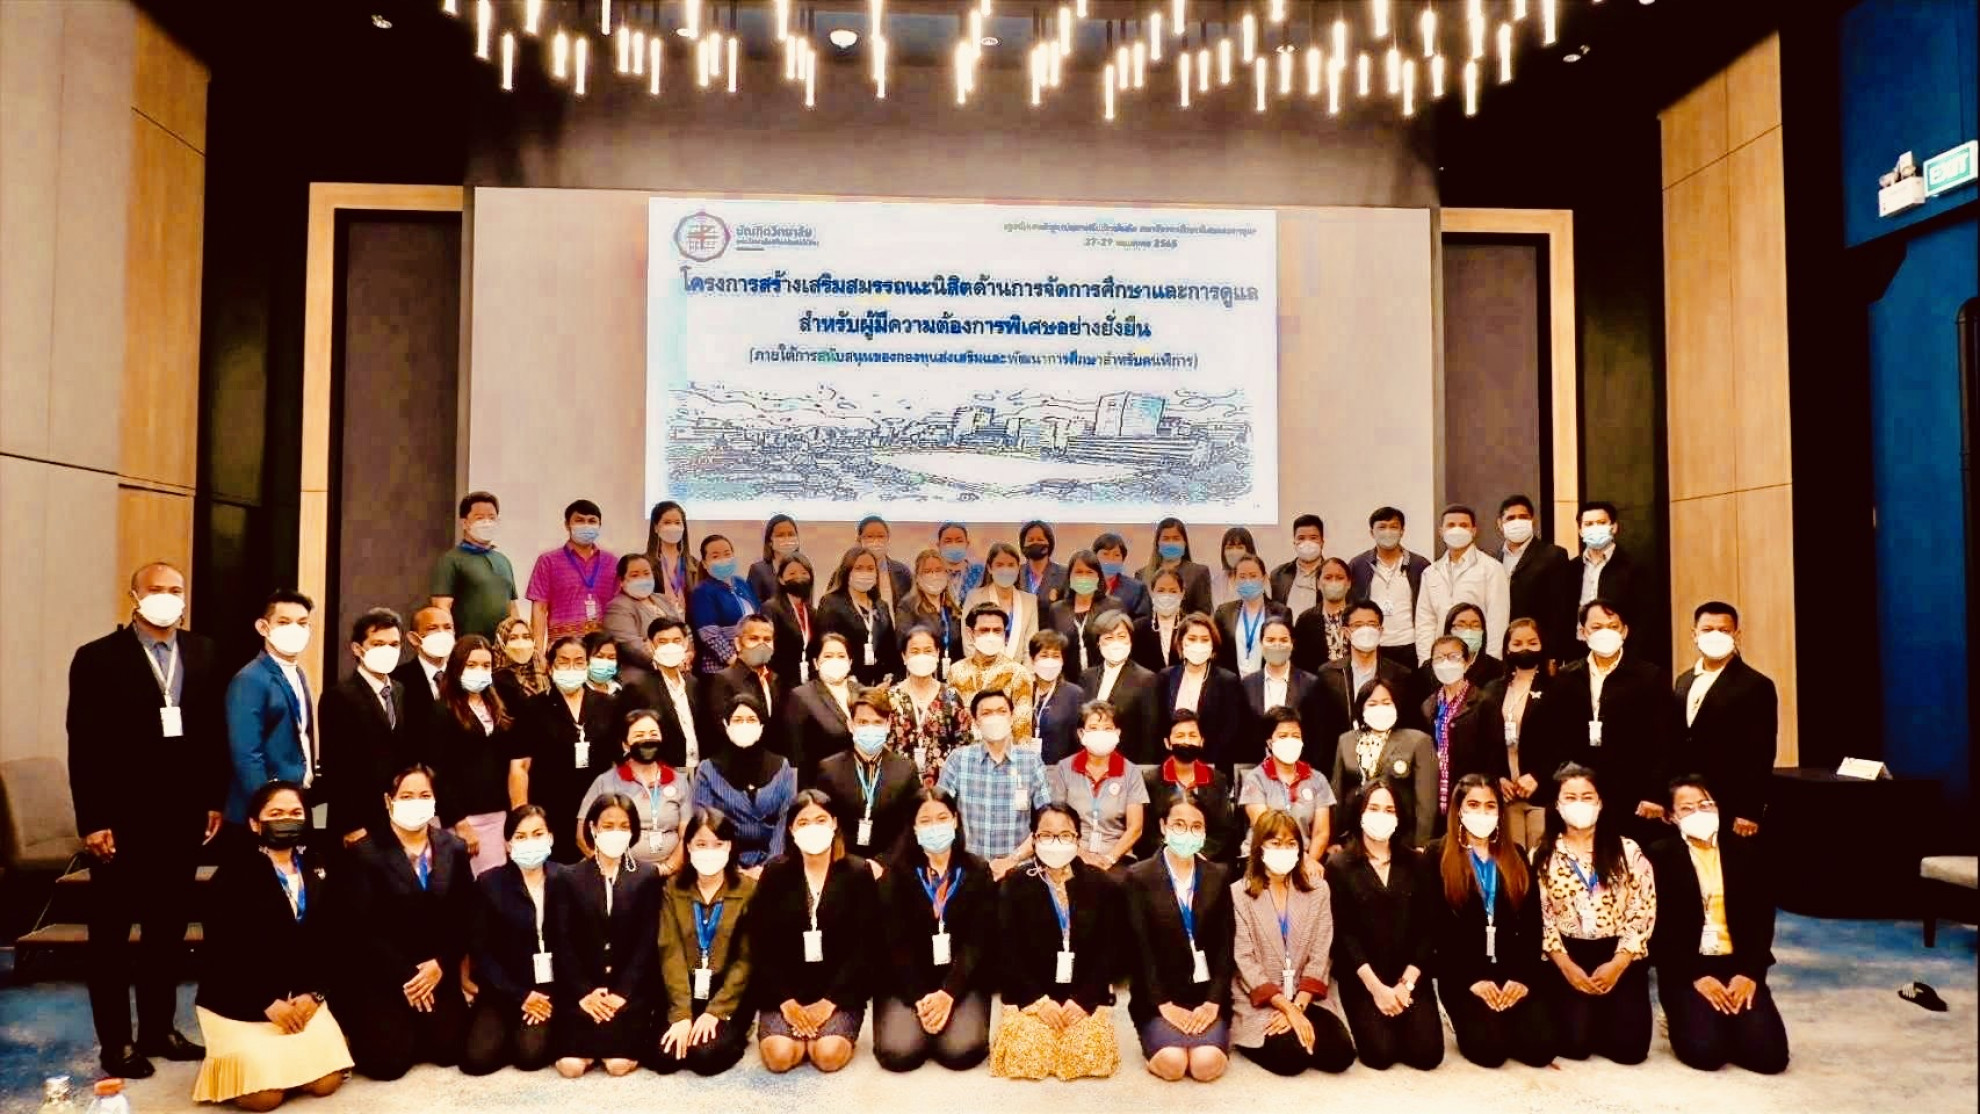 Upon successful completion of the special education and care certificate program, teachers are granted an additional 15% of their median monthly income, leading to a notable monthly income increase of approximately 2,500 Thai baht.